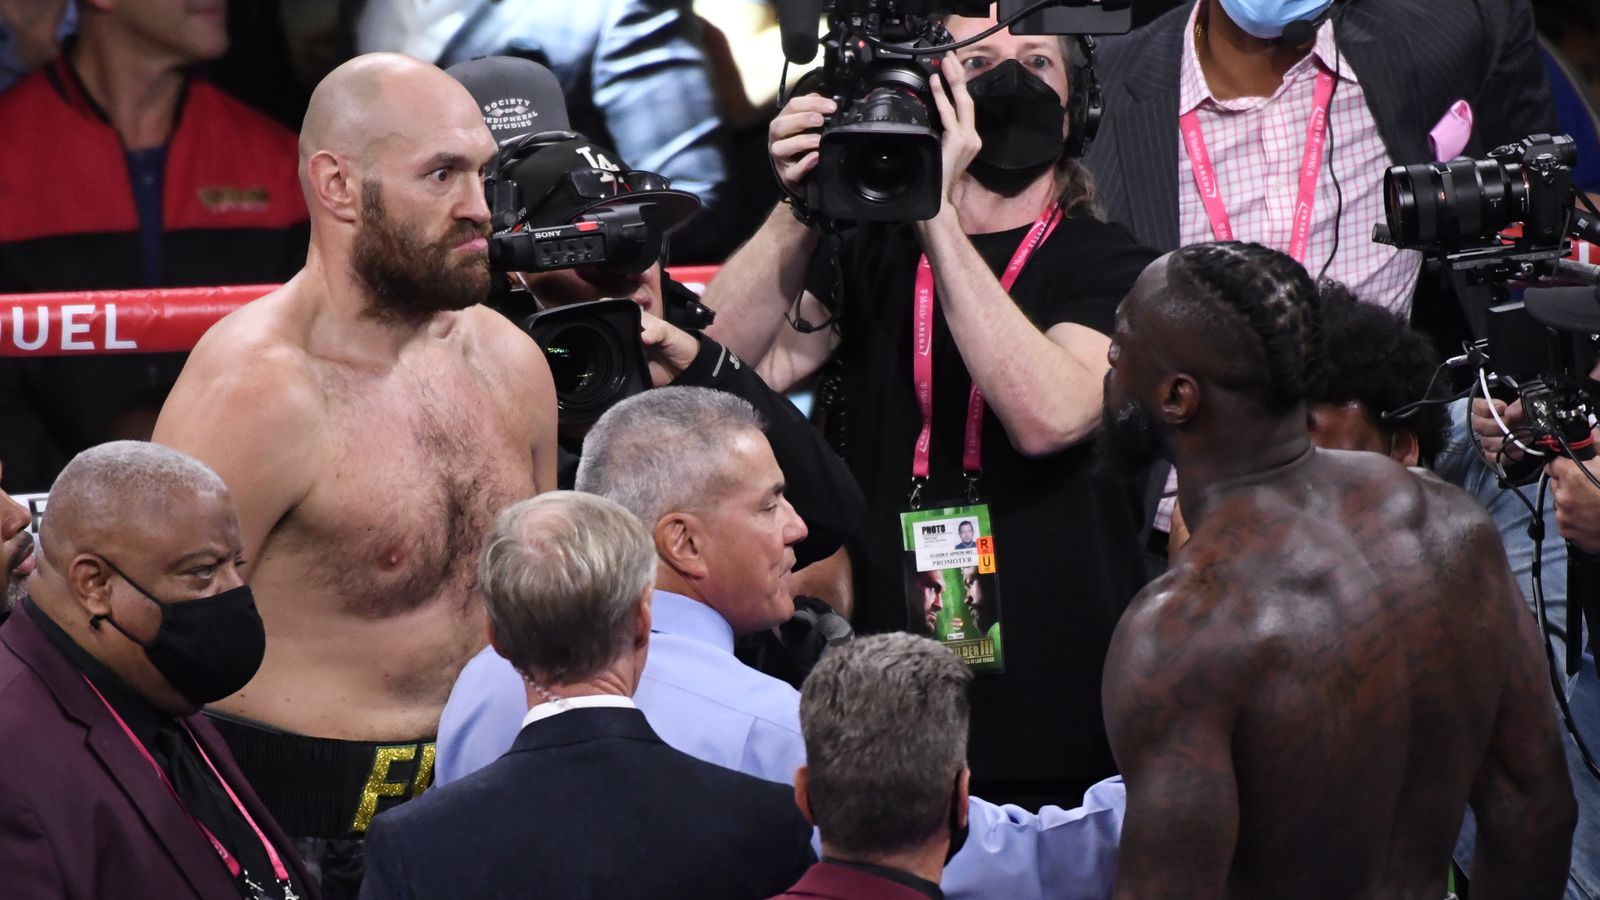 Raw video: Watch Tyson Fury post-fight confrontation with Deontay Wilder — ‘I don’t respect you’ - MMA Mania